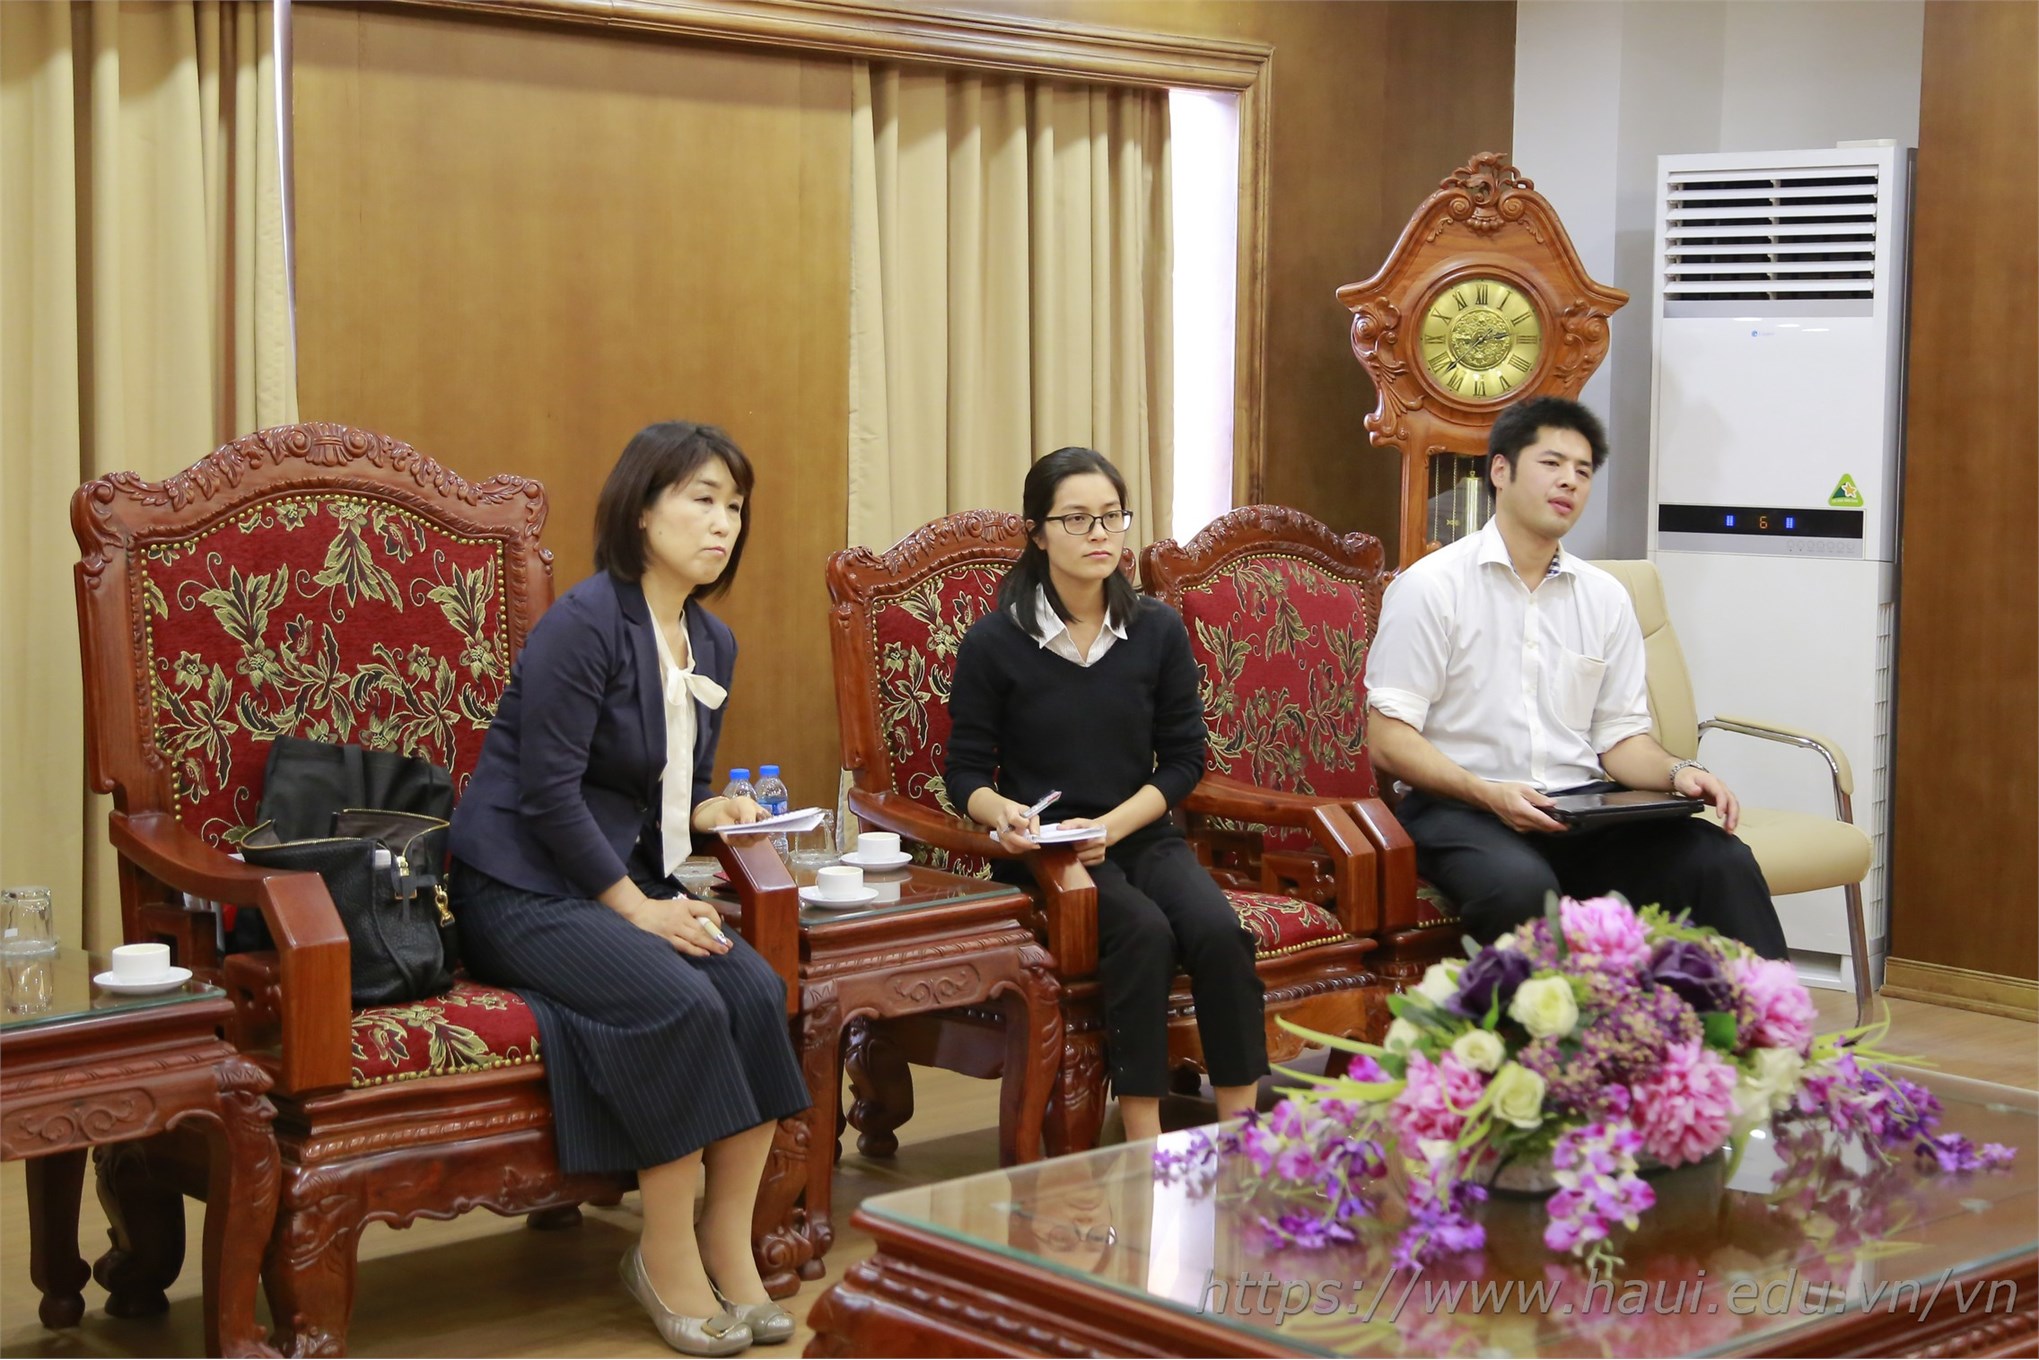 Welcoming Japanese language specialist to pay a working visit at Hanoi University of Industry